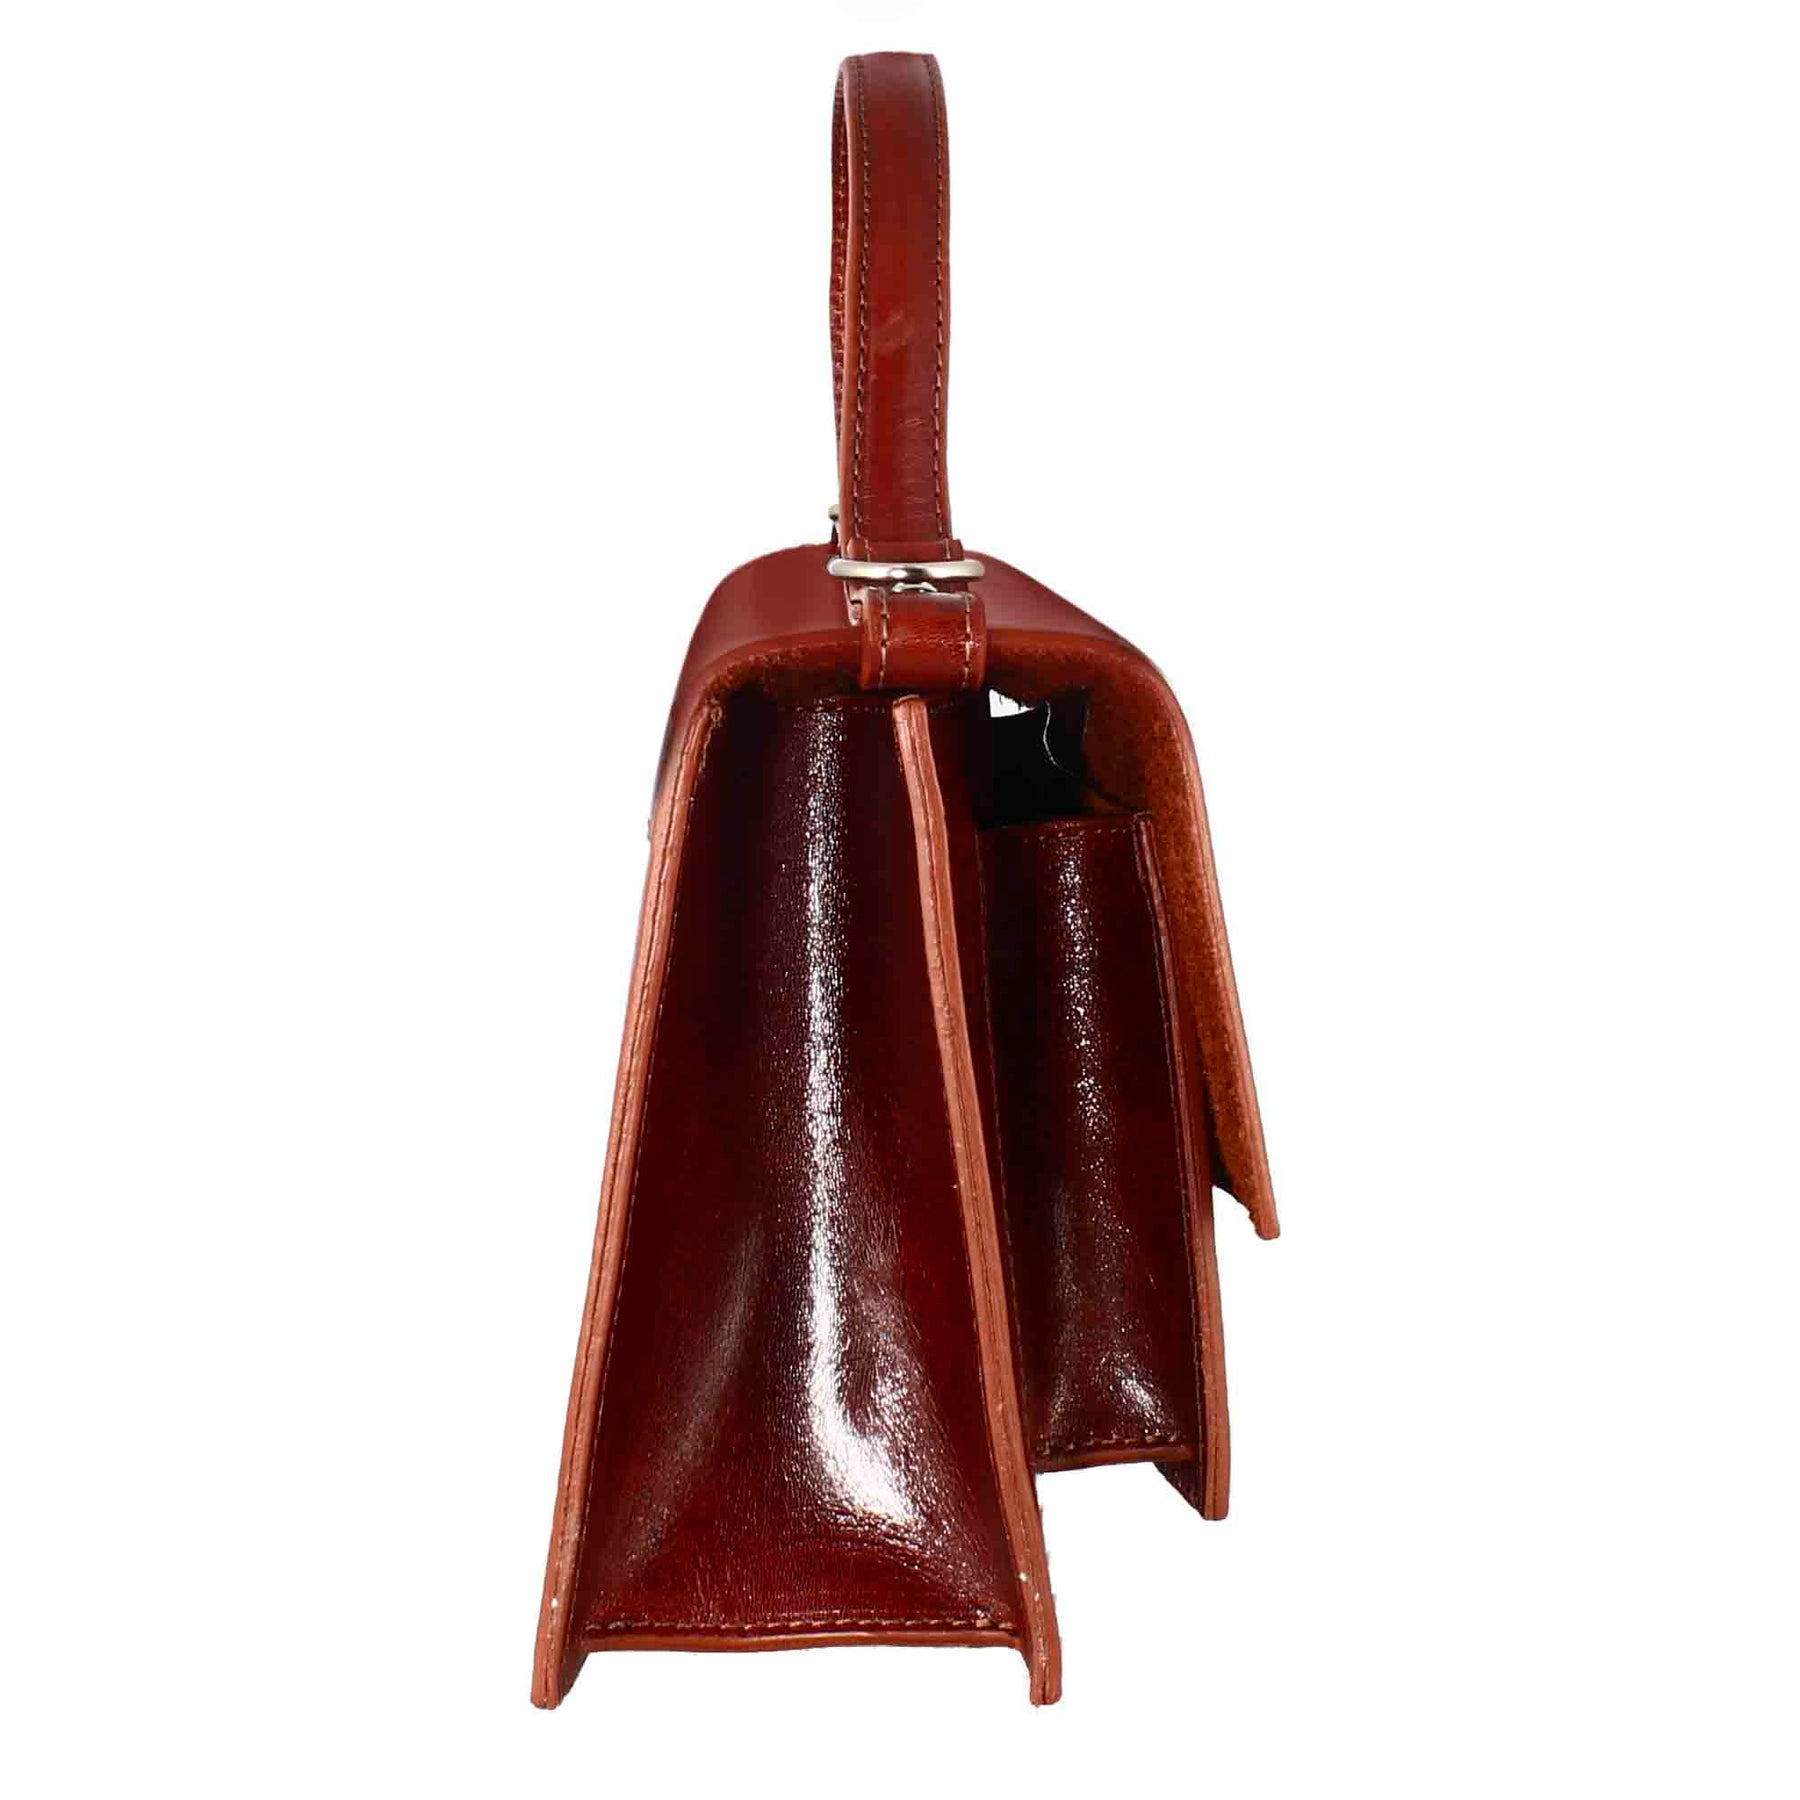 Classic women's Contessina bag in smooth brown leather